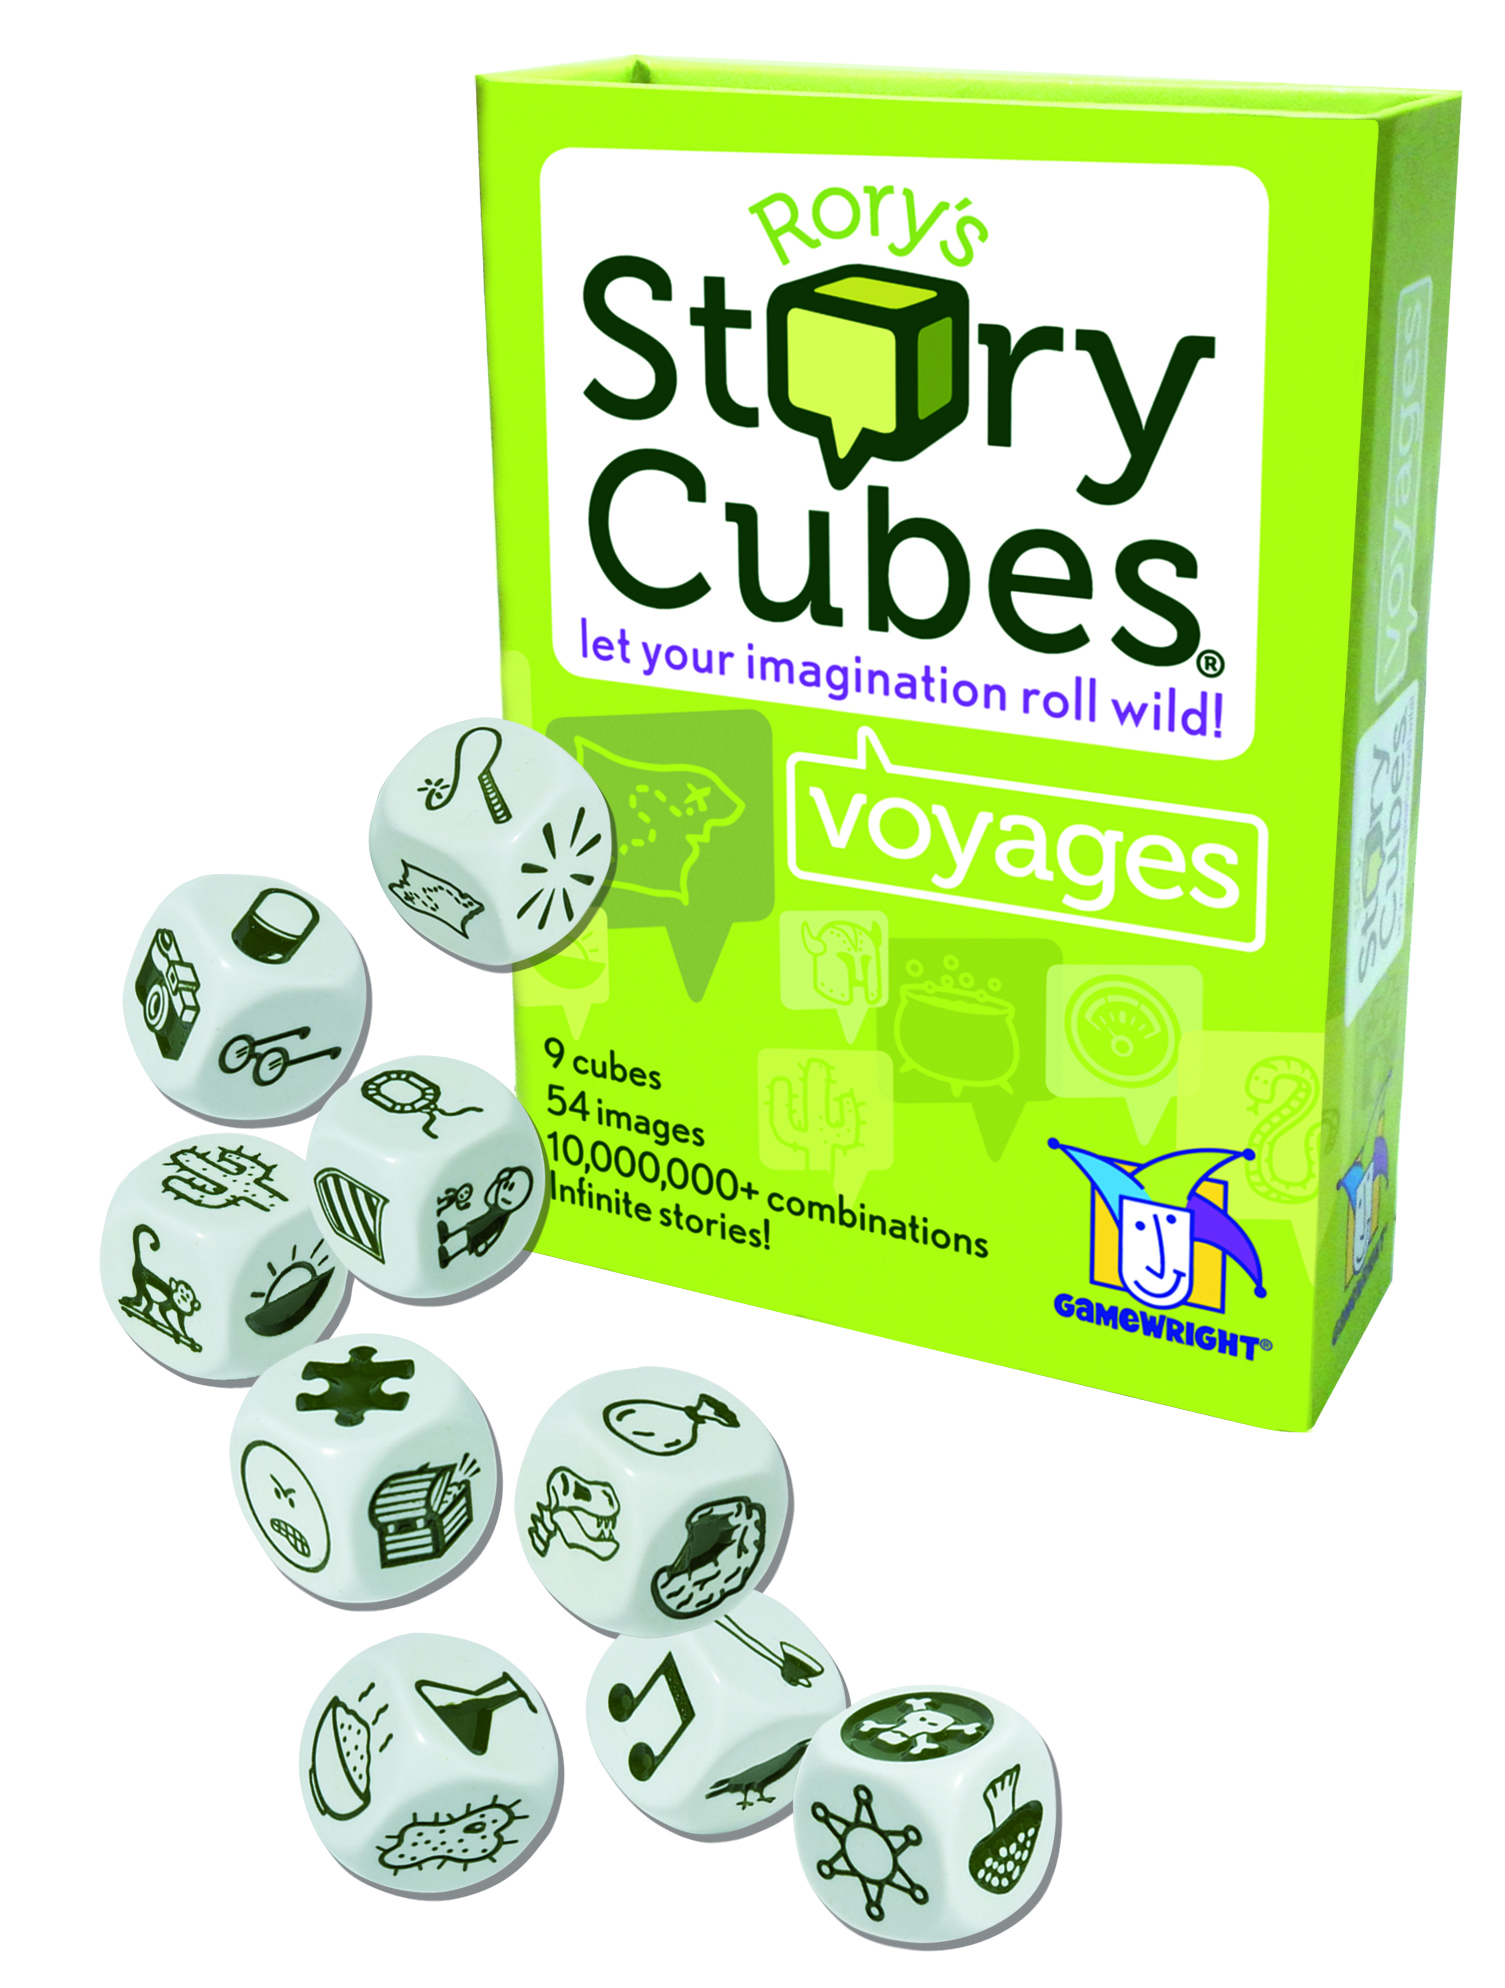 RoryS Story Cubes